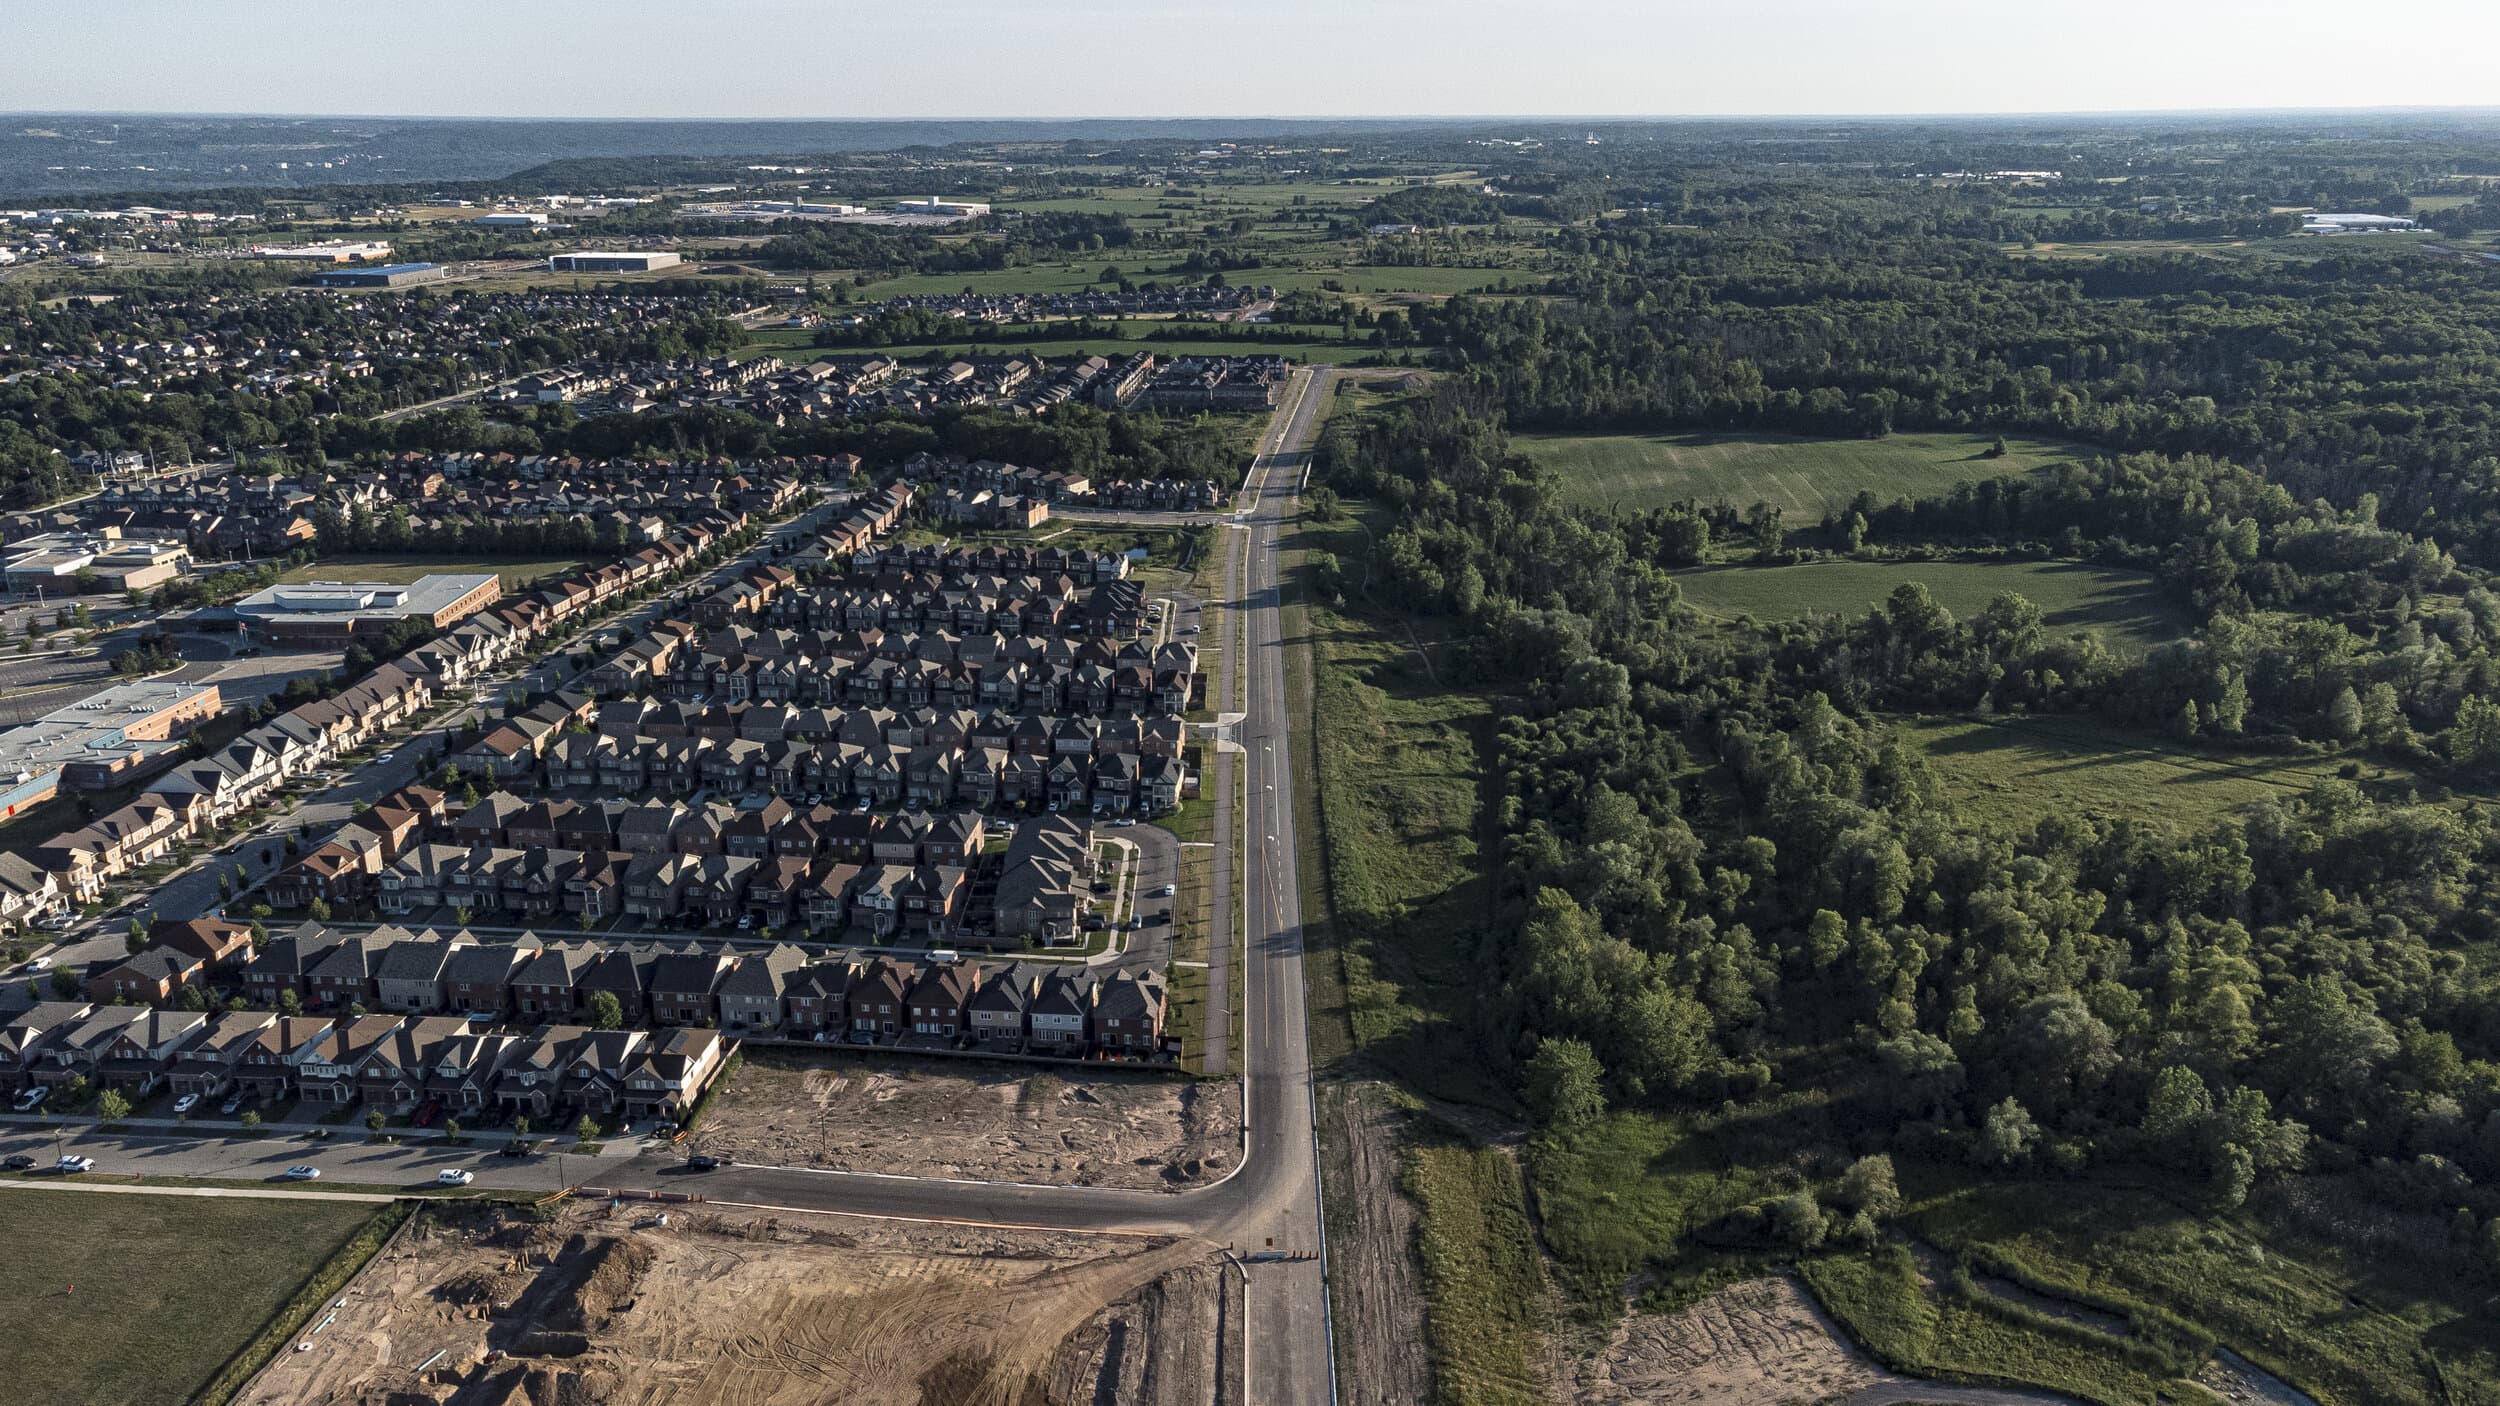 An aerial shot of suburban housing development with an imaginary but definite line separating it from a bushy forest